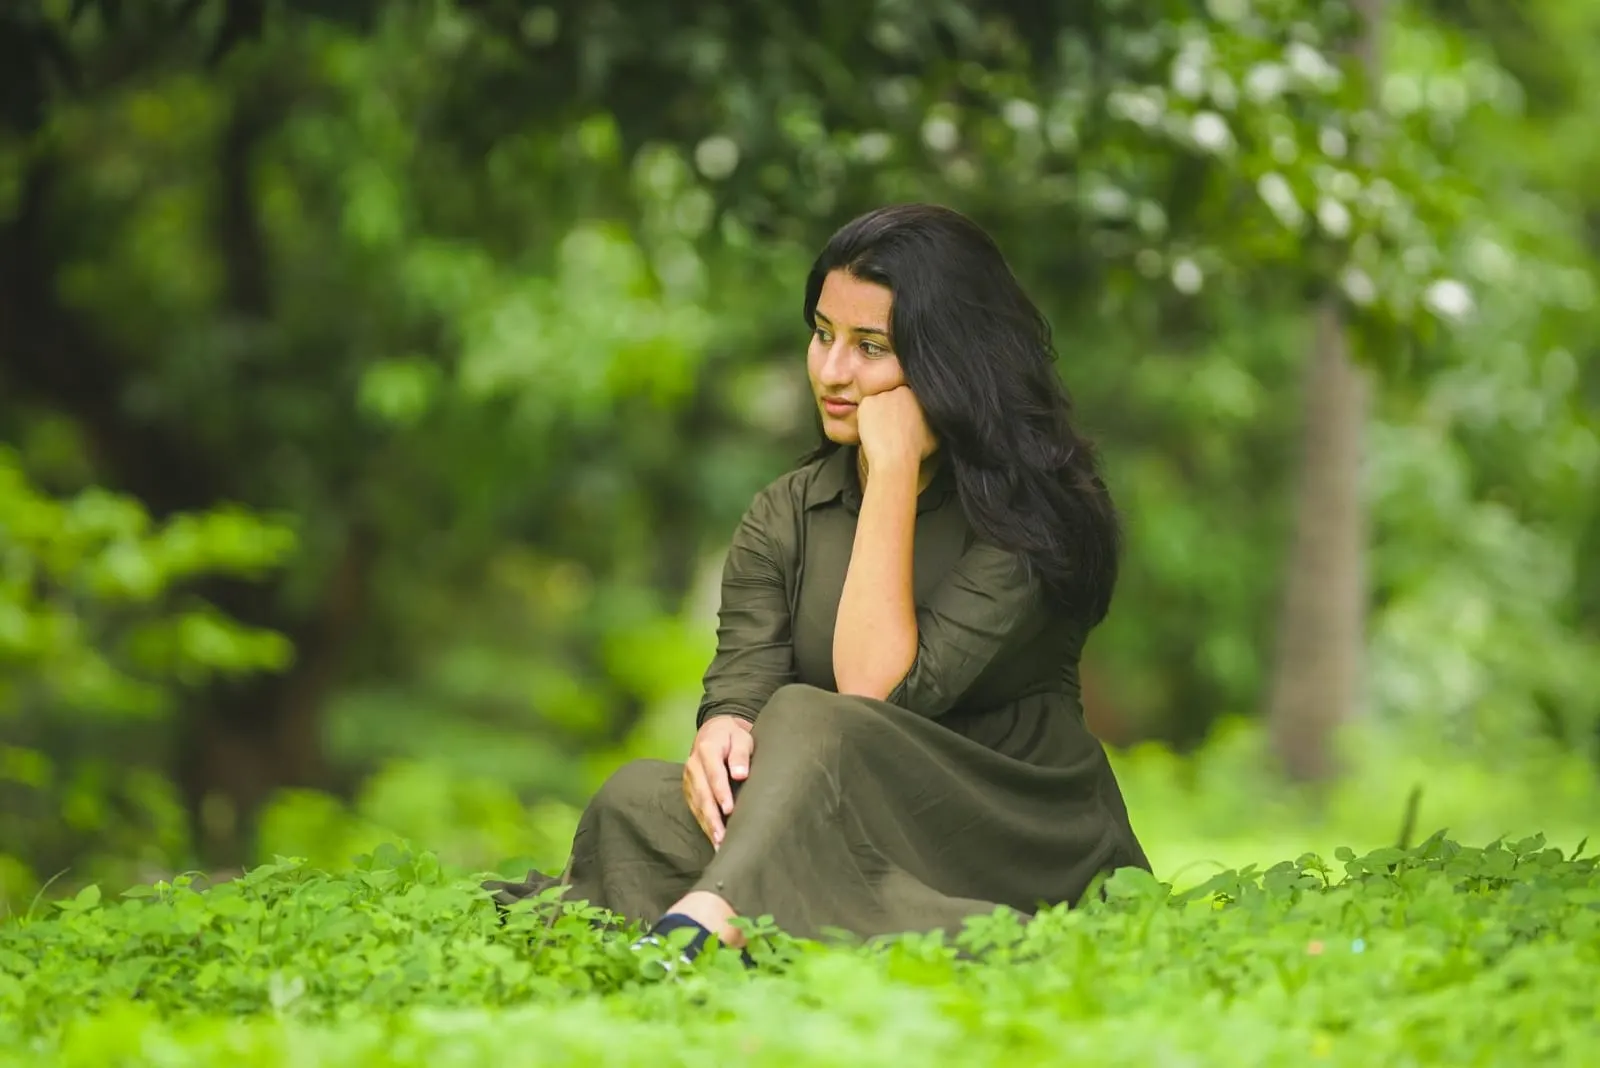 pensive woman in green dress sitting on grass